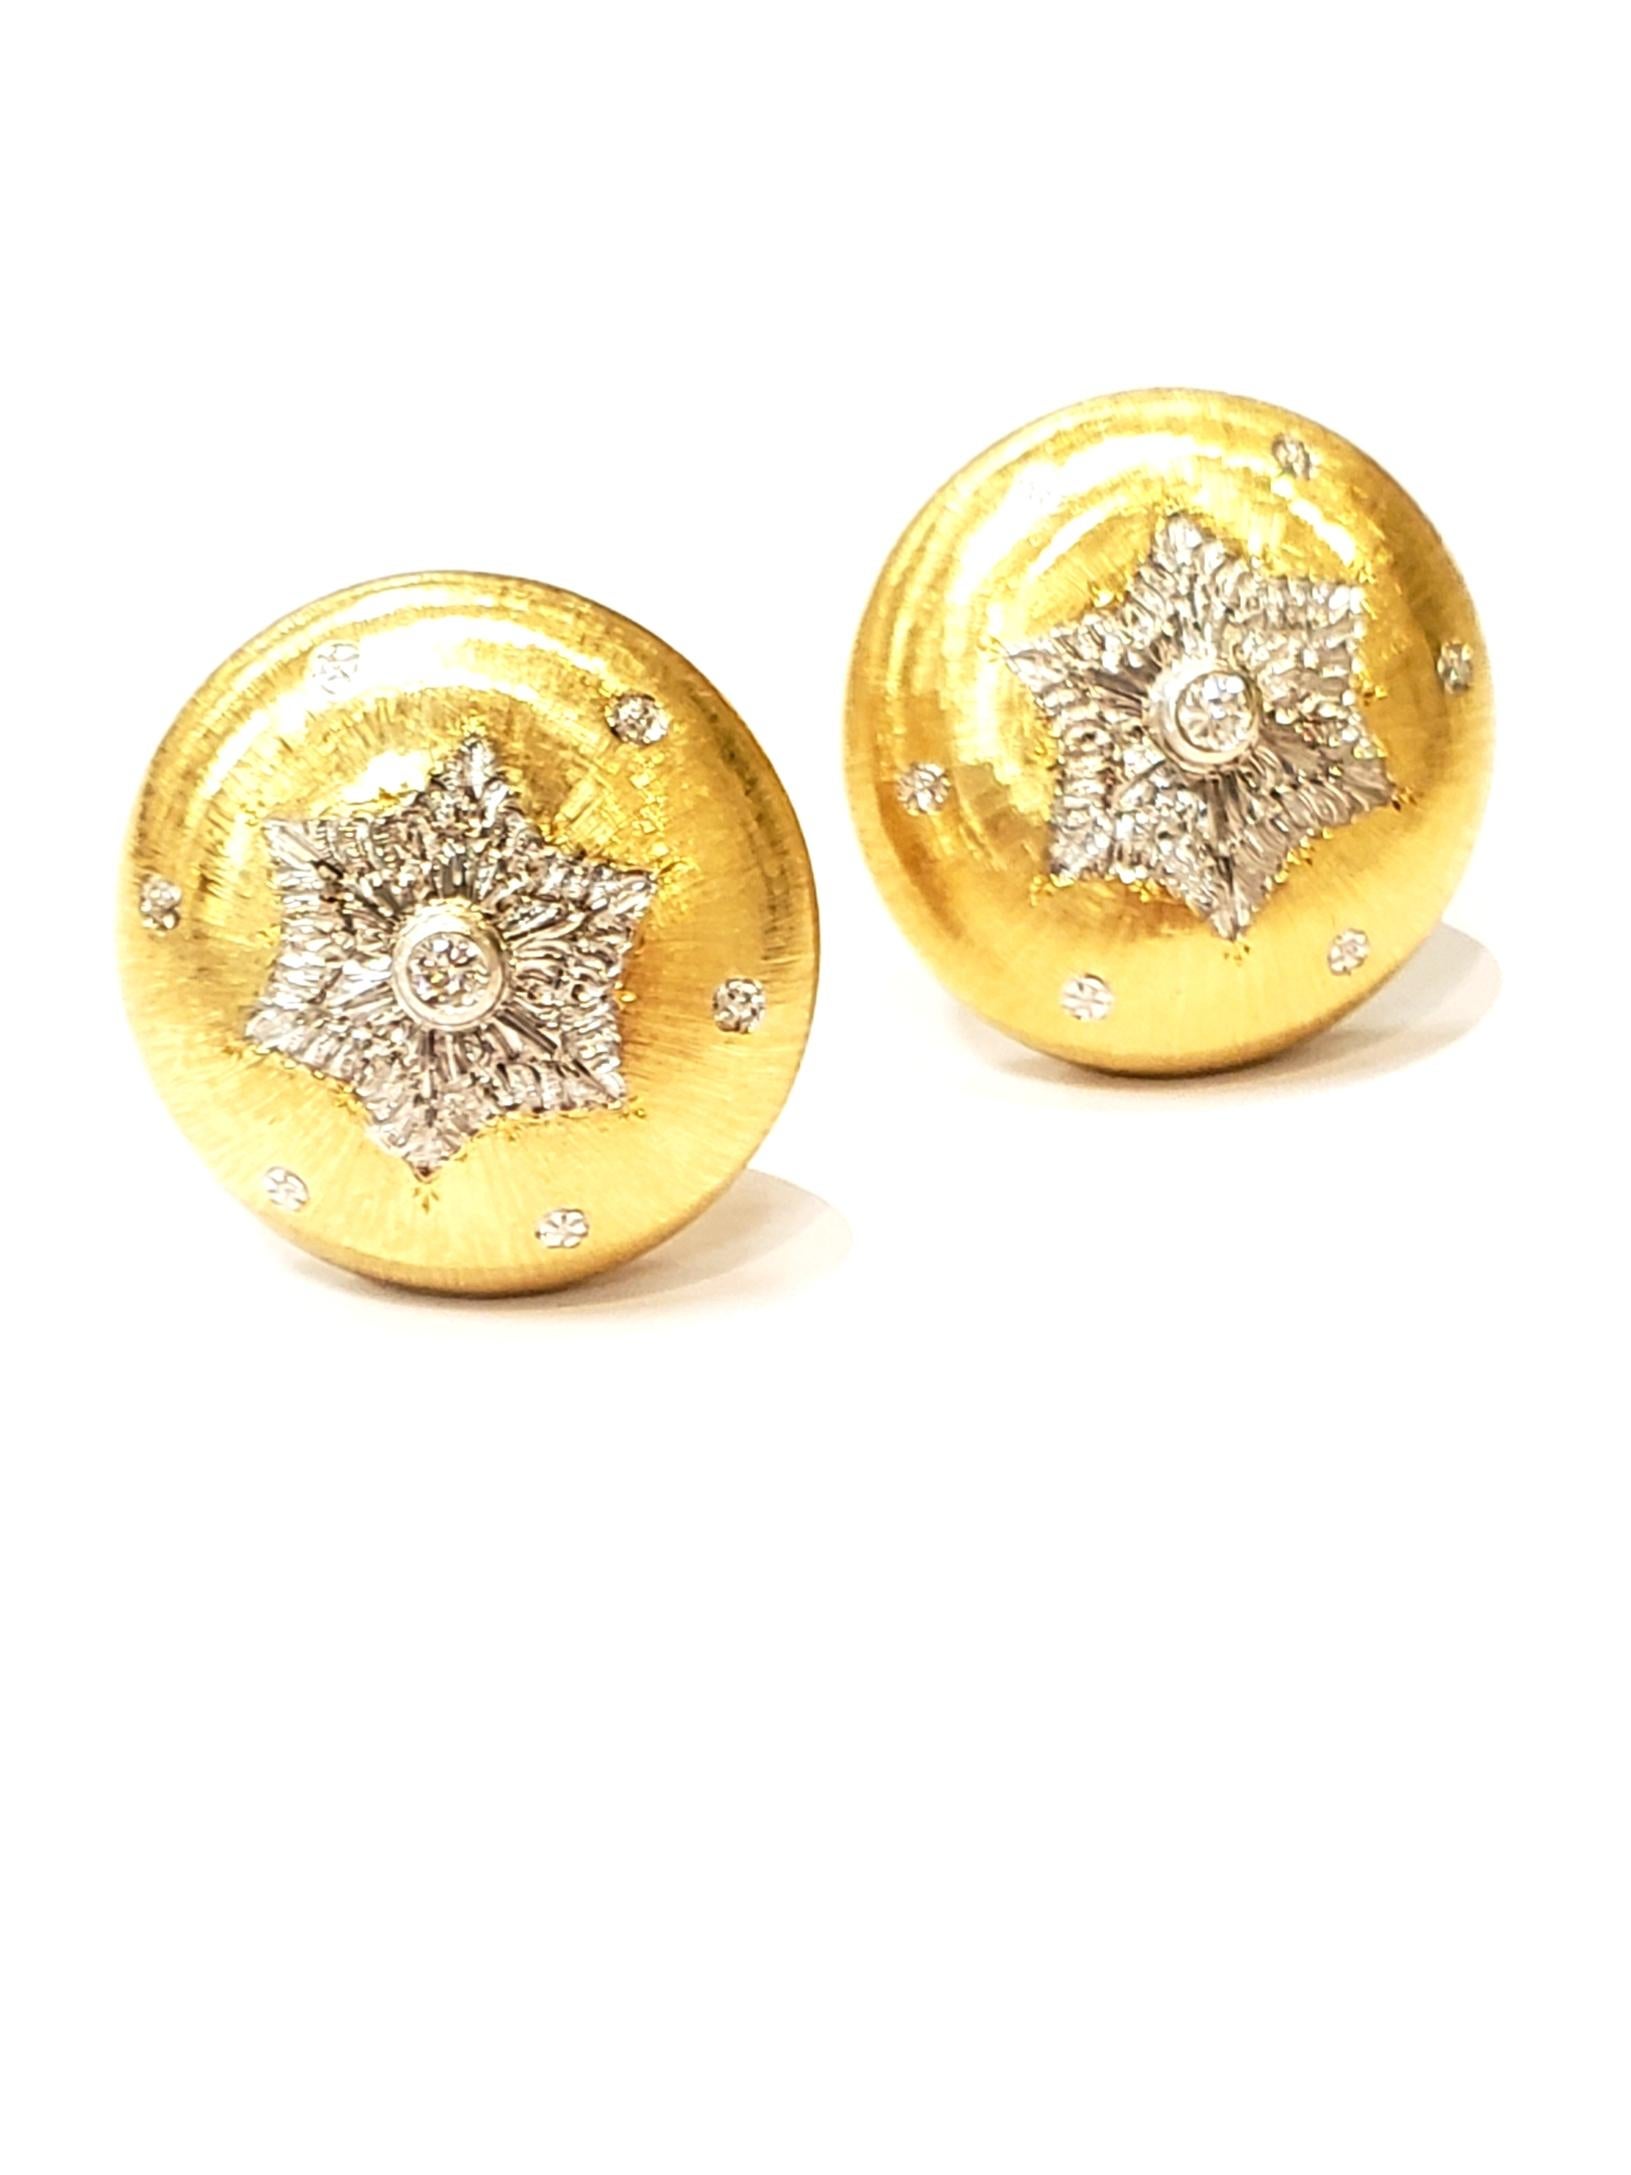 18 Karat Yellow Gold Earrings with Engraved Snowflake Design and Diamond Centers For Sale 2